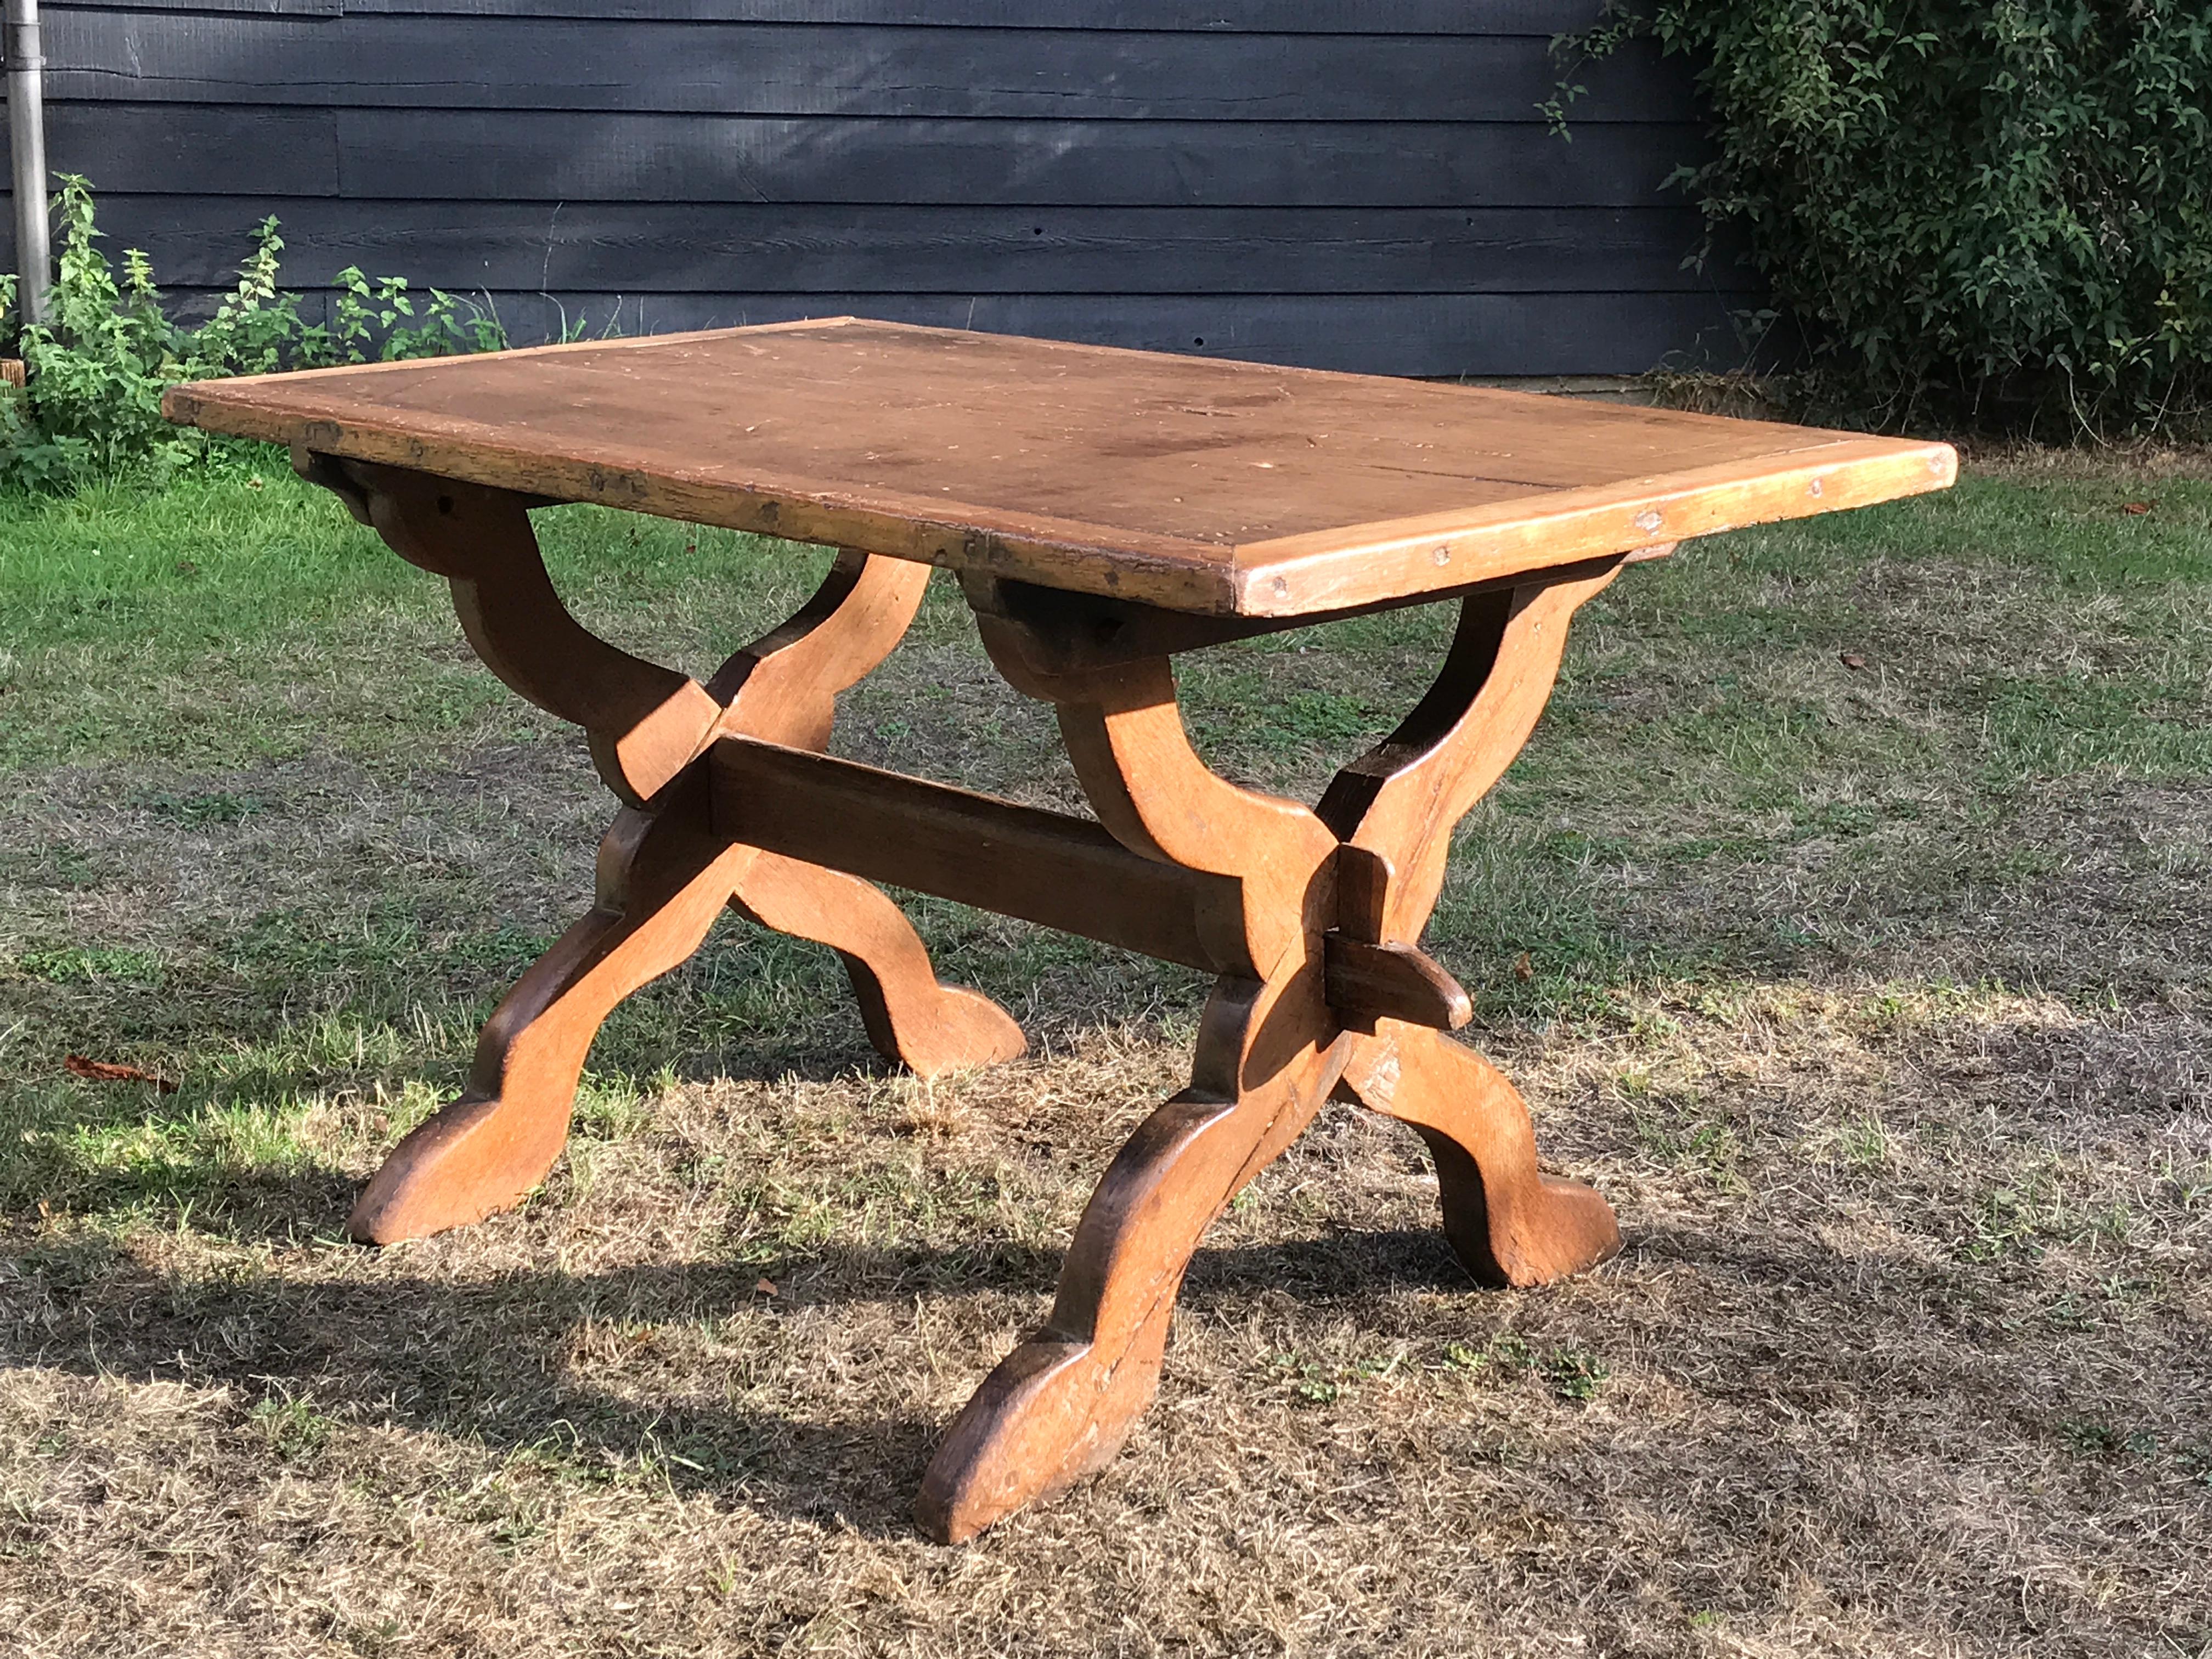 A South German oak, shaped X' ended table with detachable fruitwood top with decorative cleated band
This table is easily dismantled and retains the original pegs
The cleated edge creates a decorative banding
Provenance: Giffords Hall